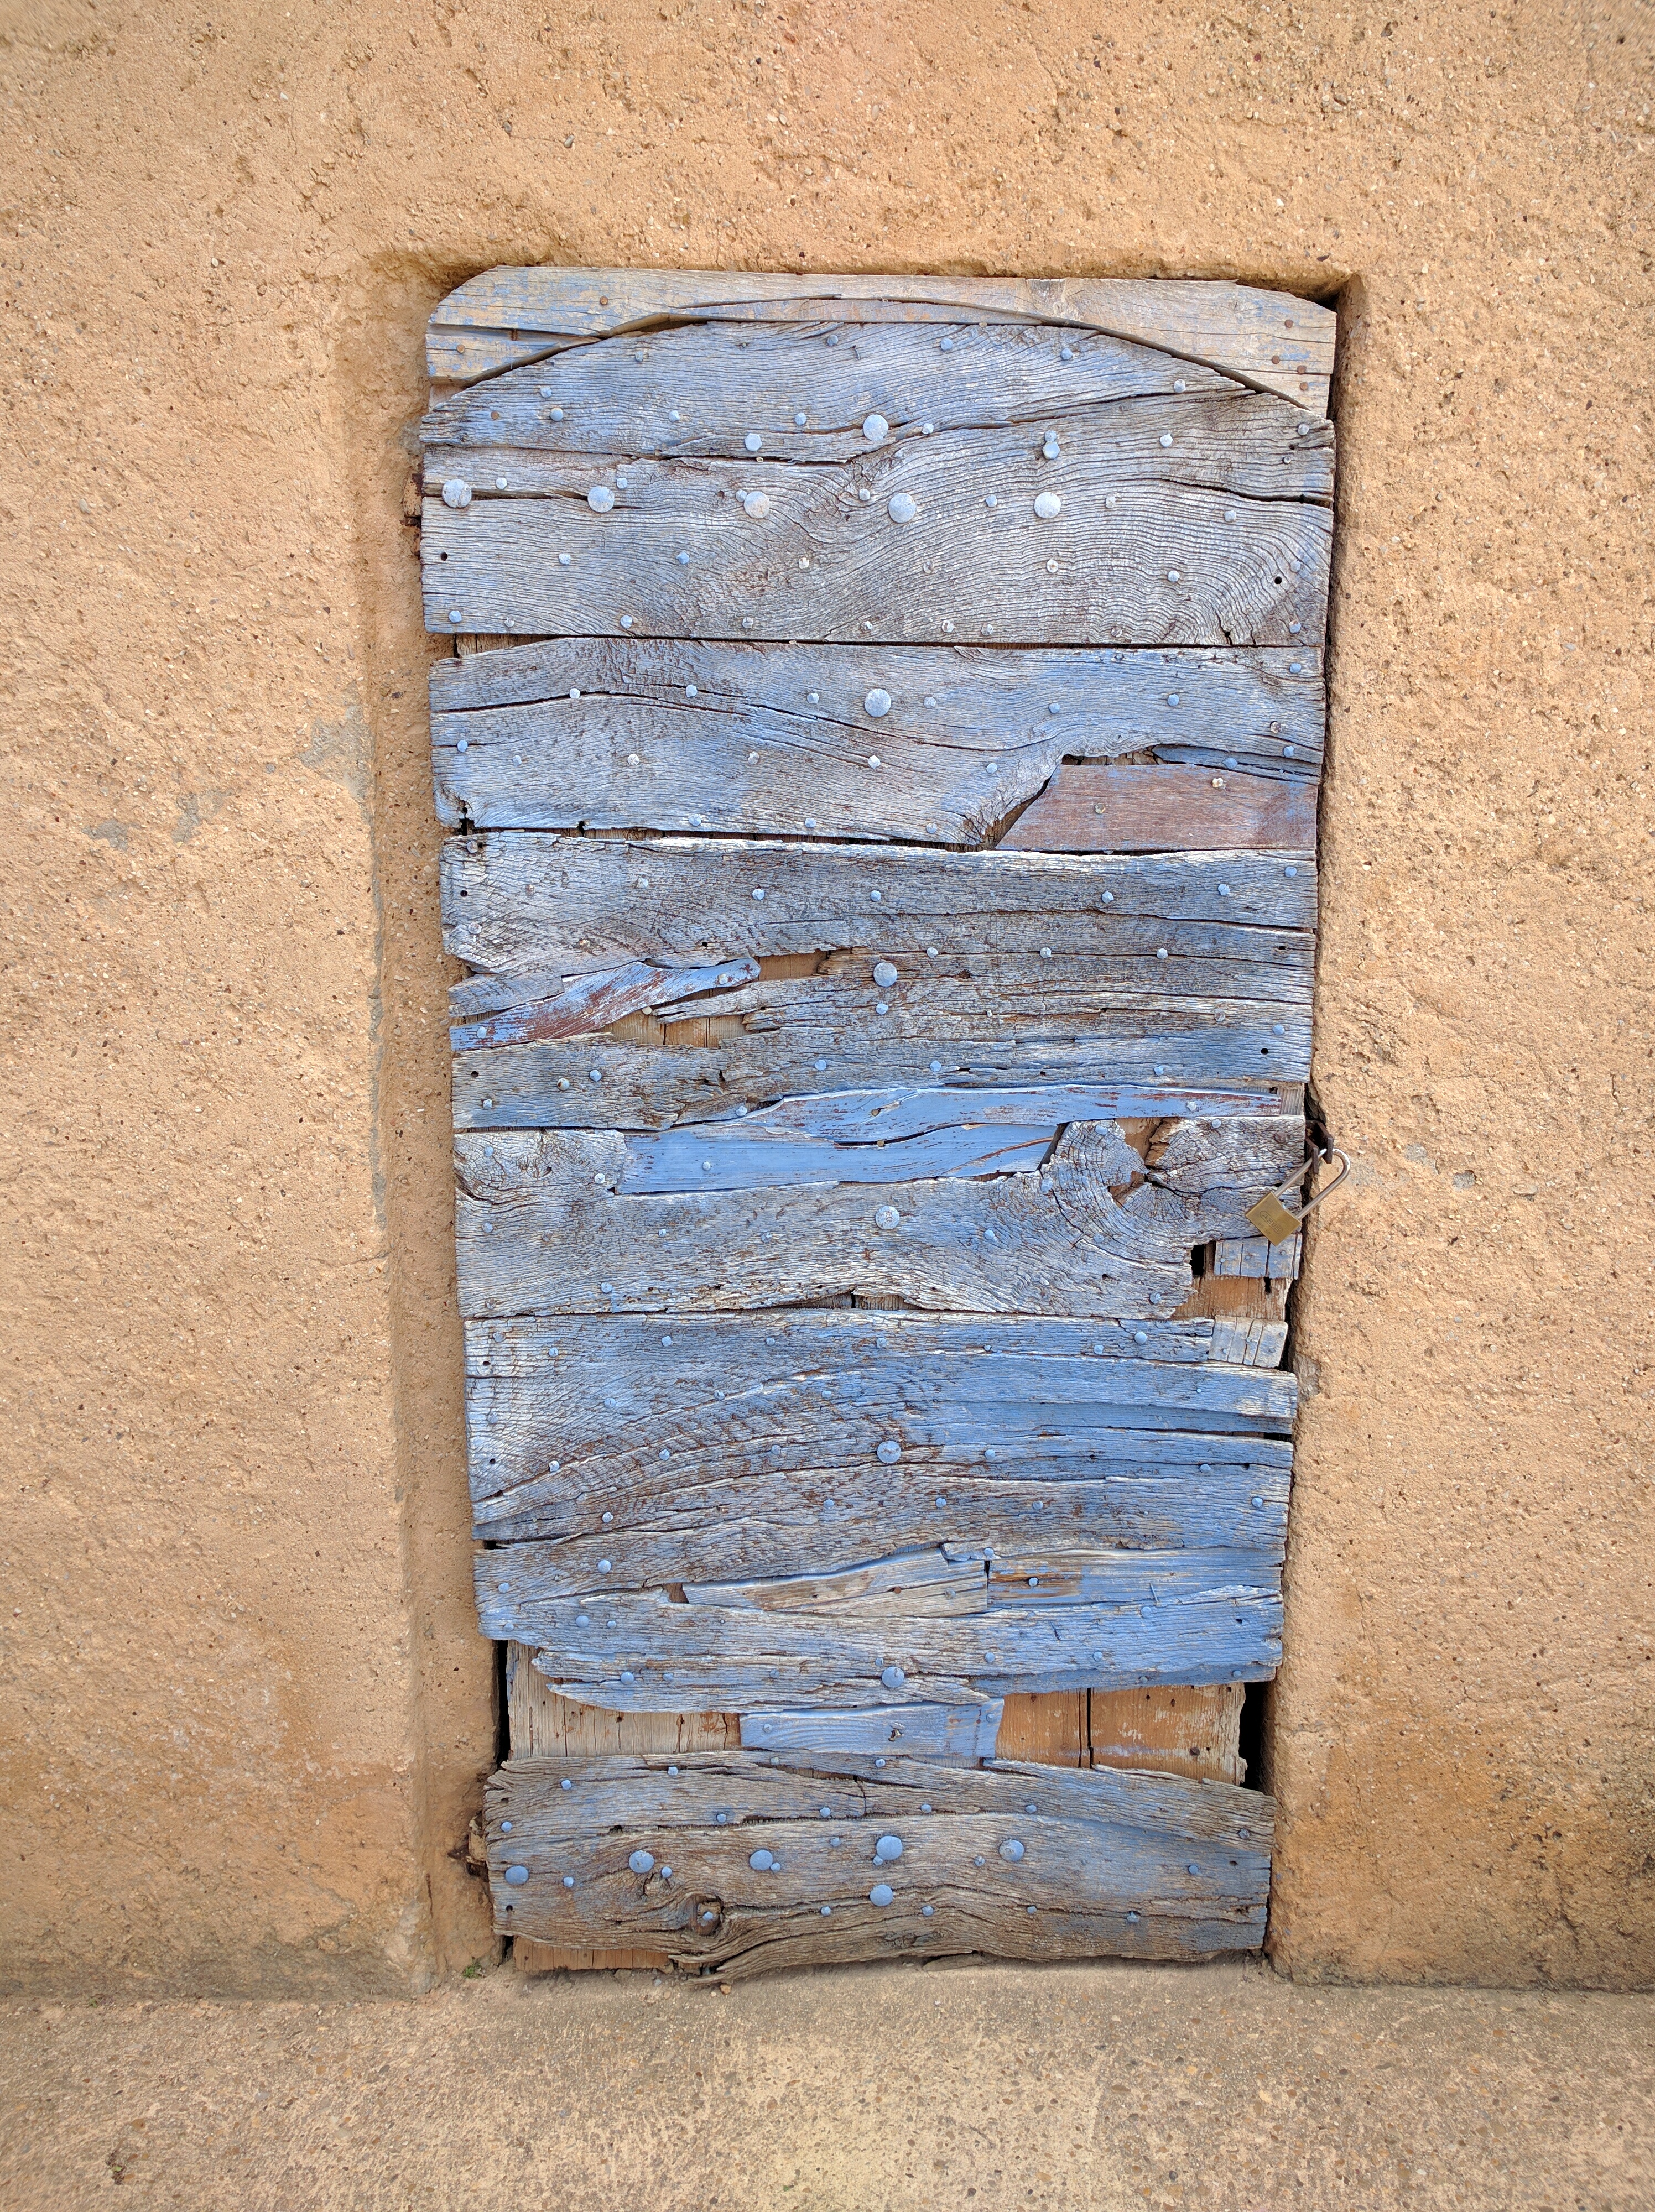 Roussillon seemed to have lots of doors in blue; Kelly liked this very faded one on a church